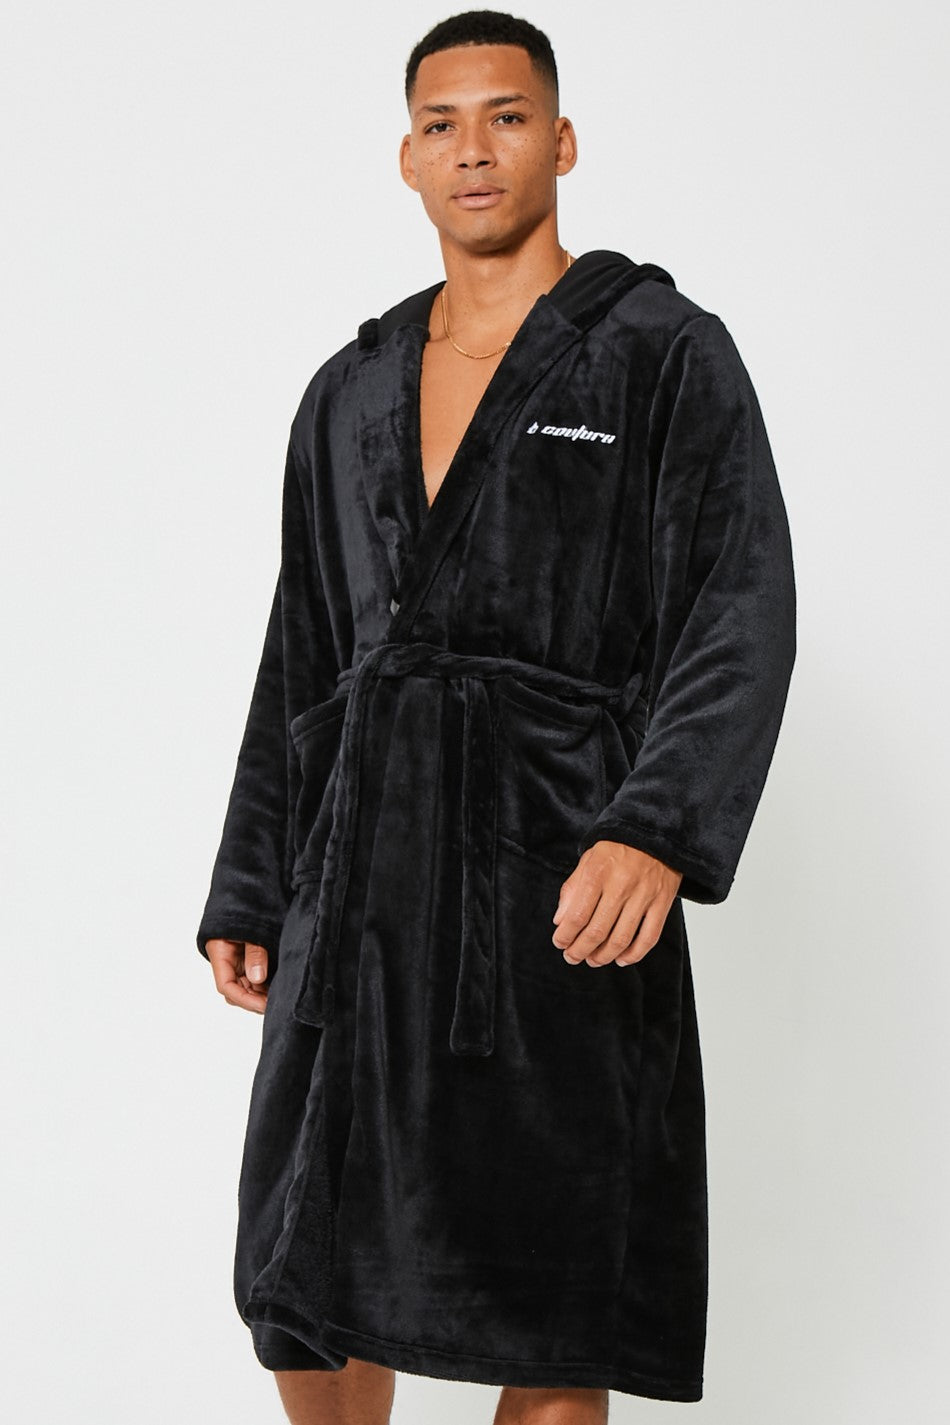 Fletcher Street Hooded Dressing Gown - Black product